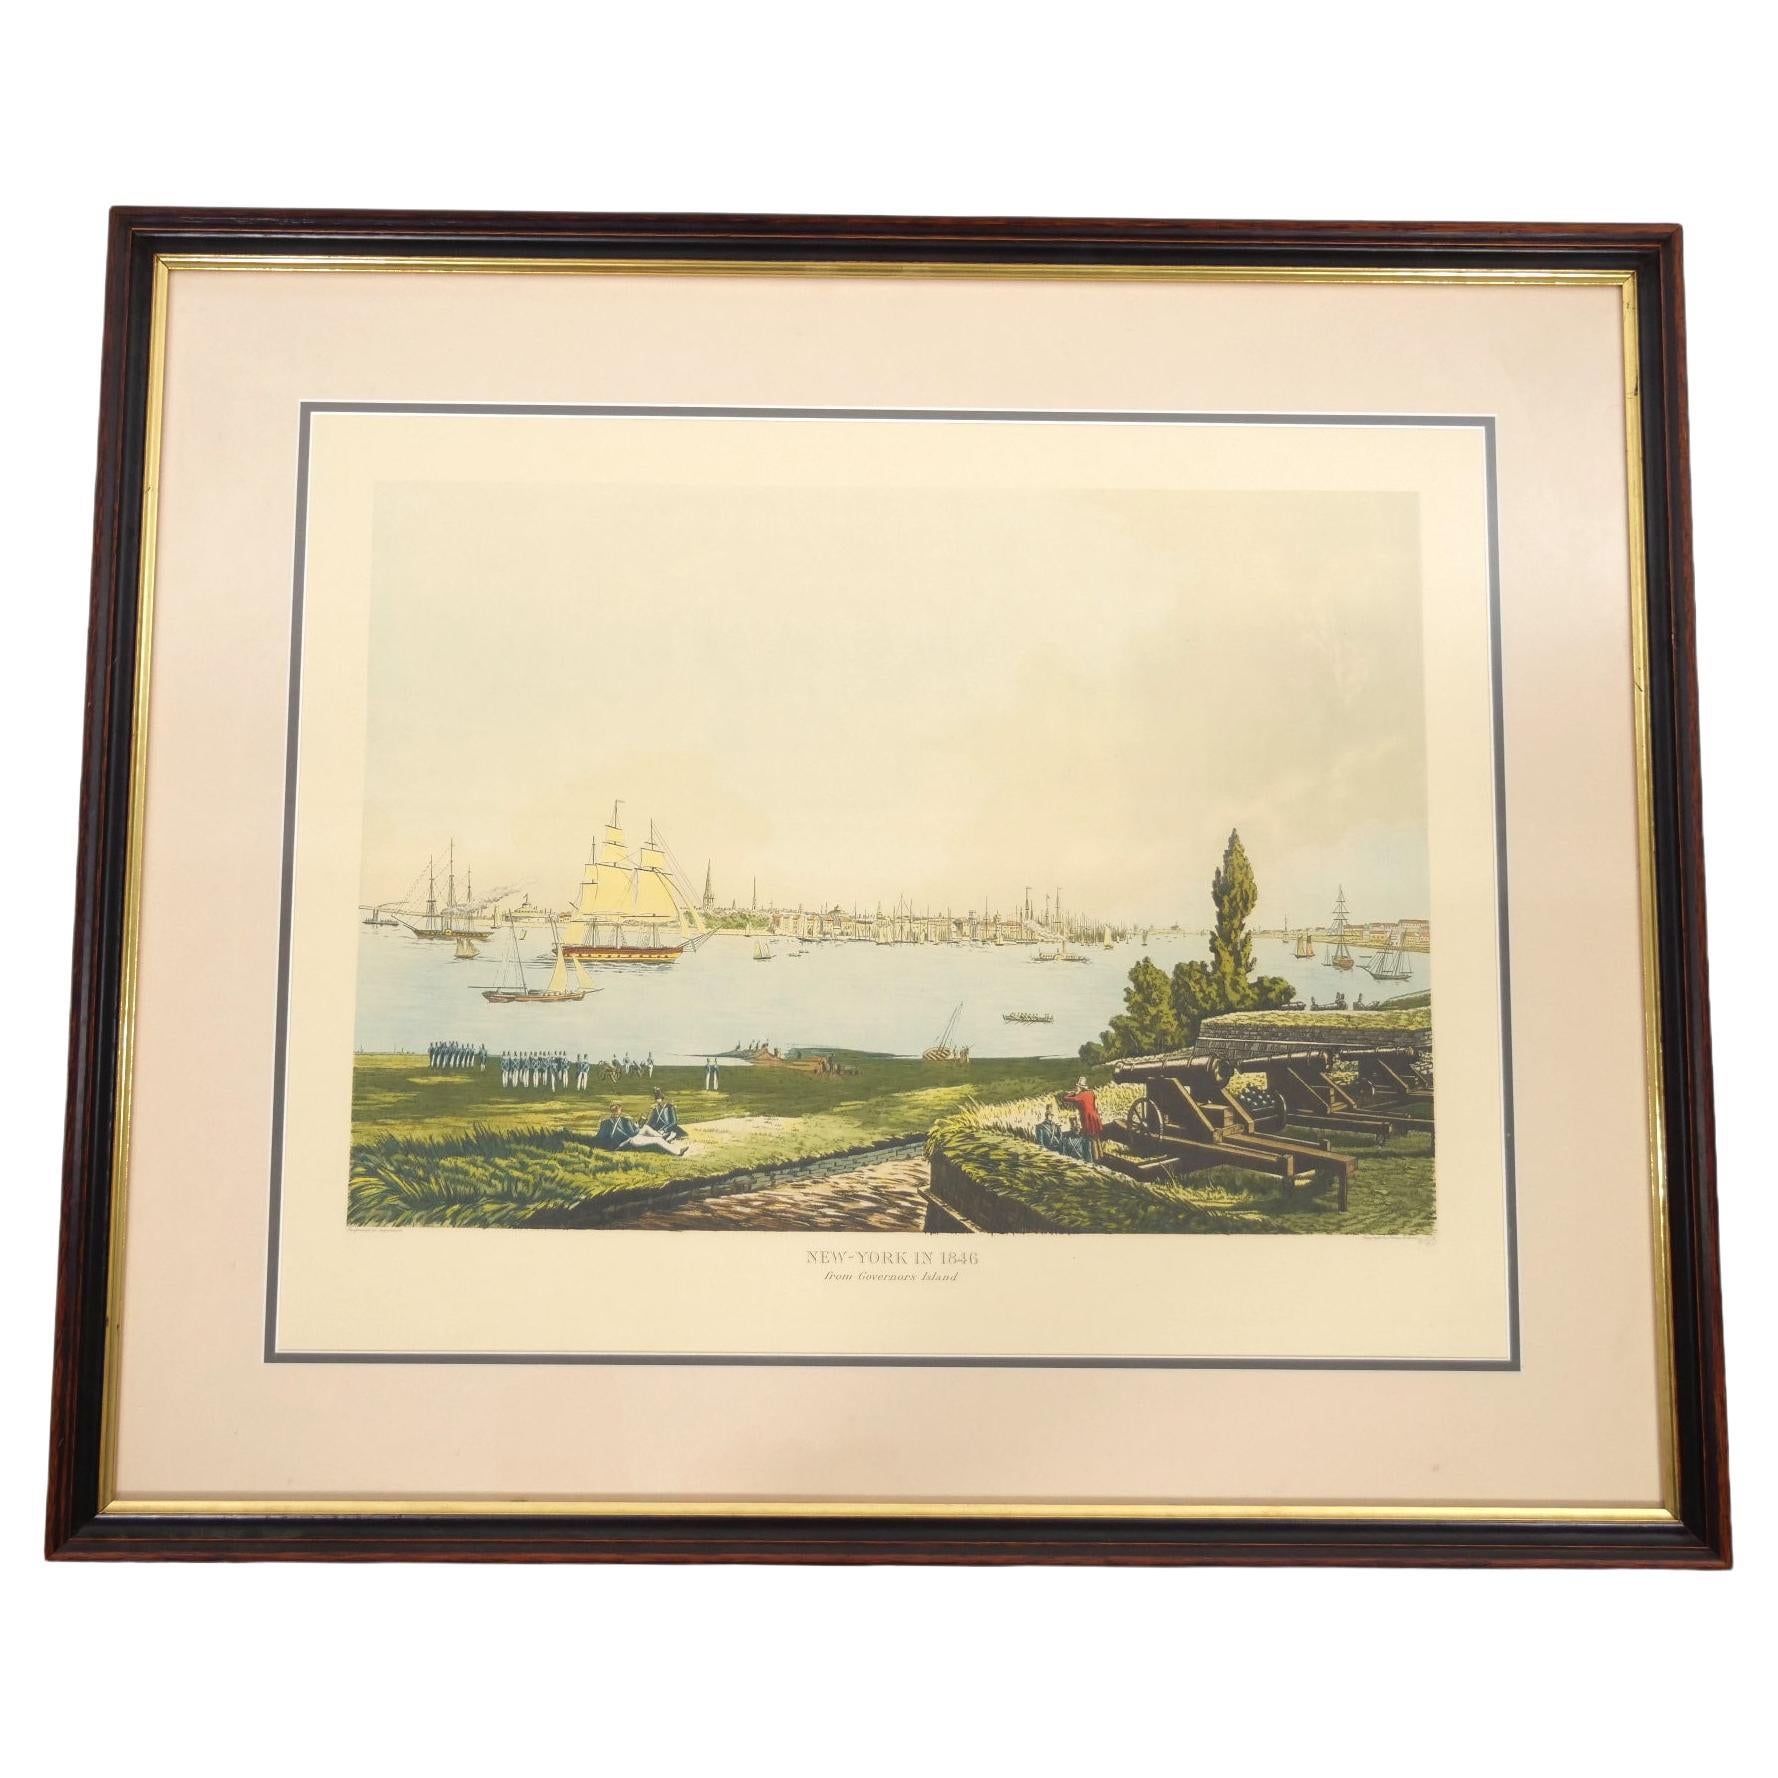 New York / 1846 Framed Aquatint Etching After Frederick Caitherwood